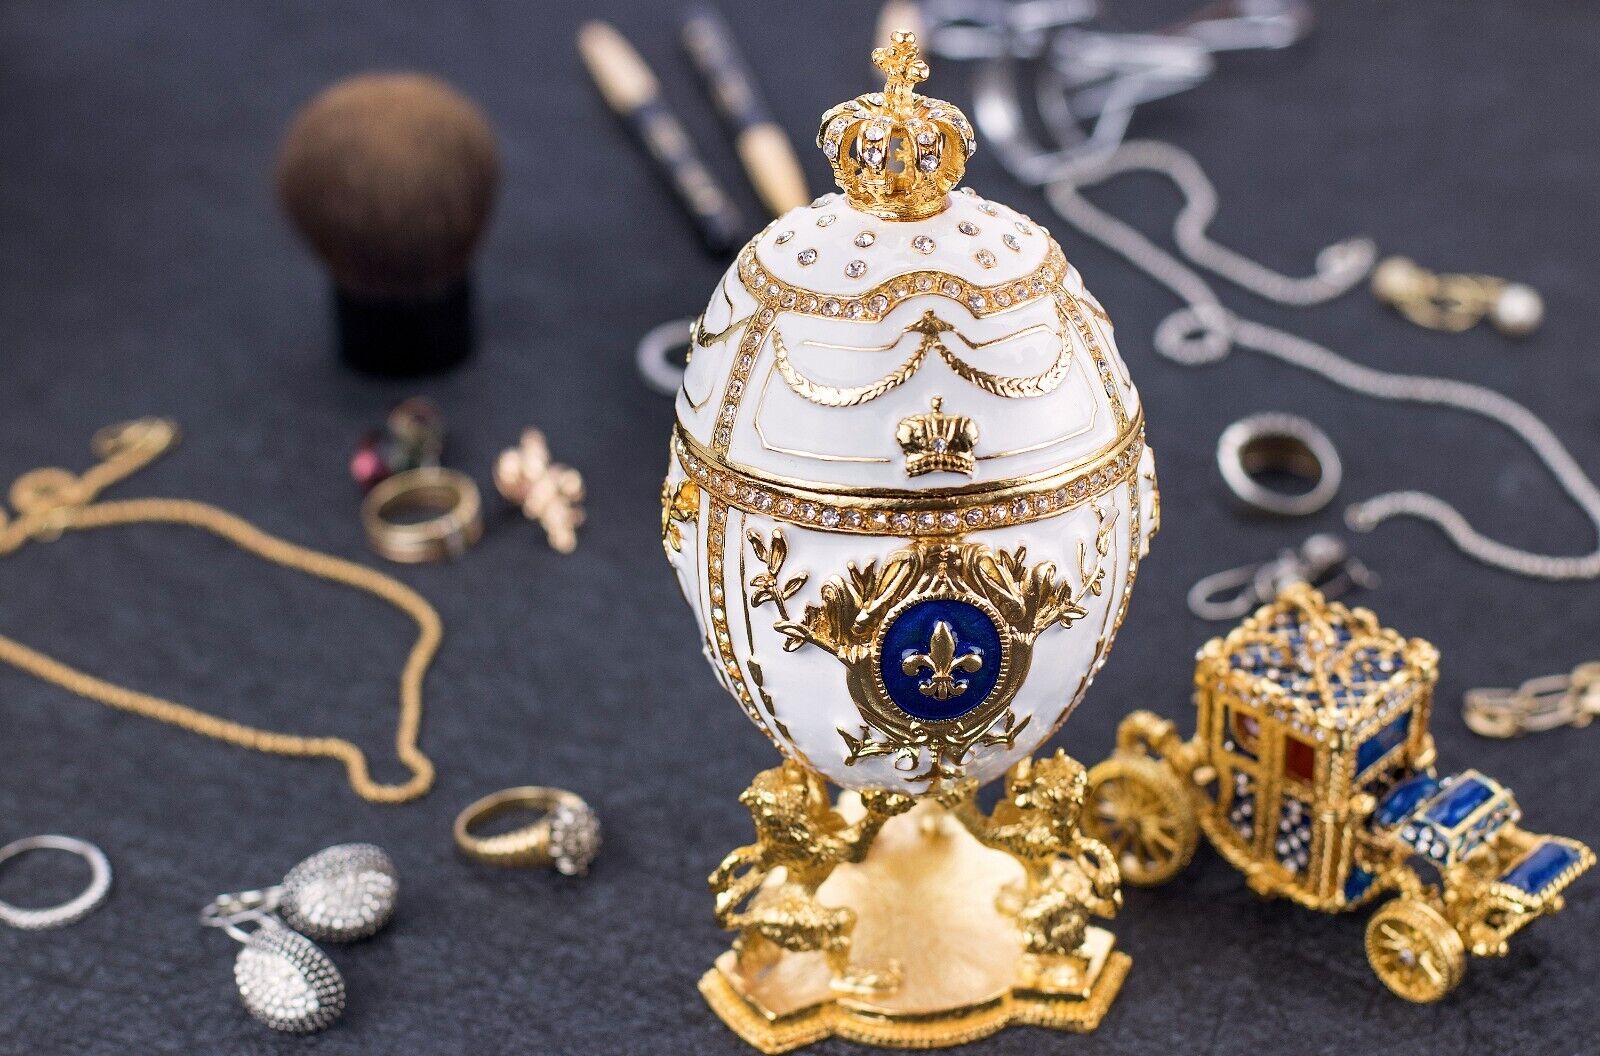 Royal Imperial White Faberge Egg Replica : Large 6.6 inch + Carriage by Vtry